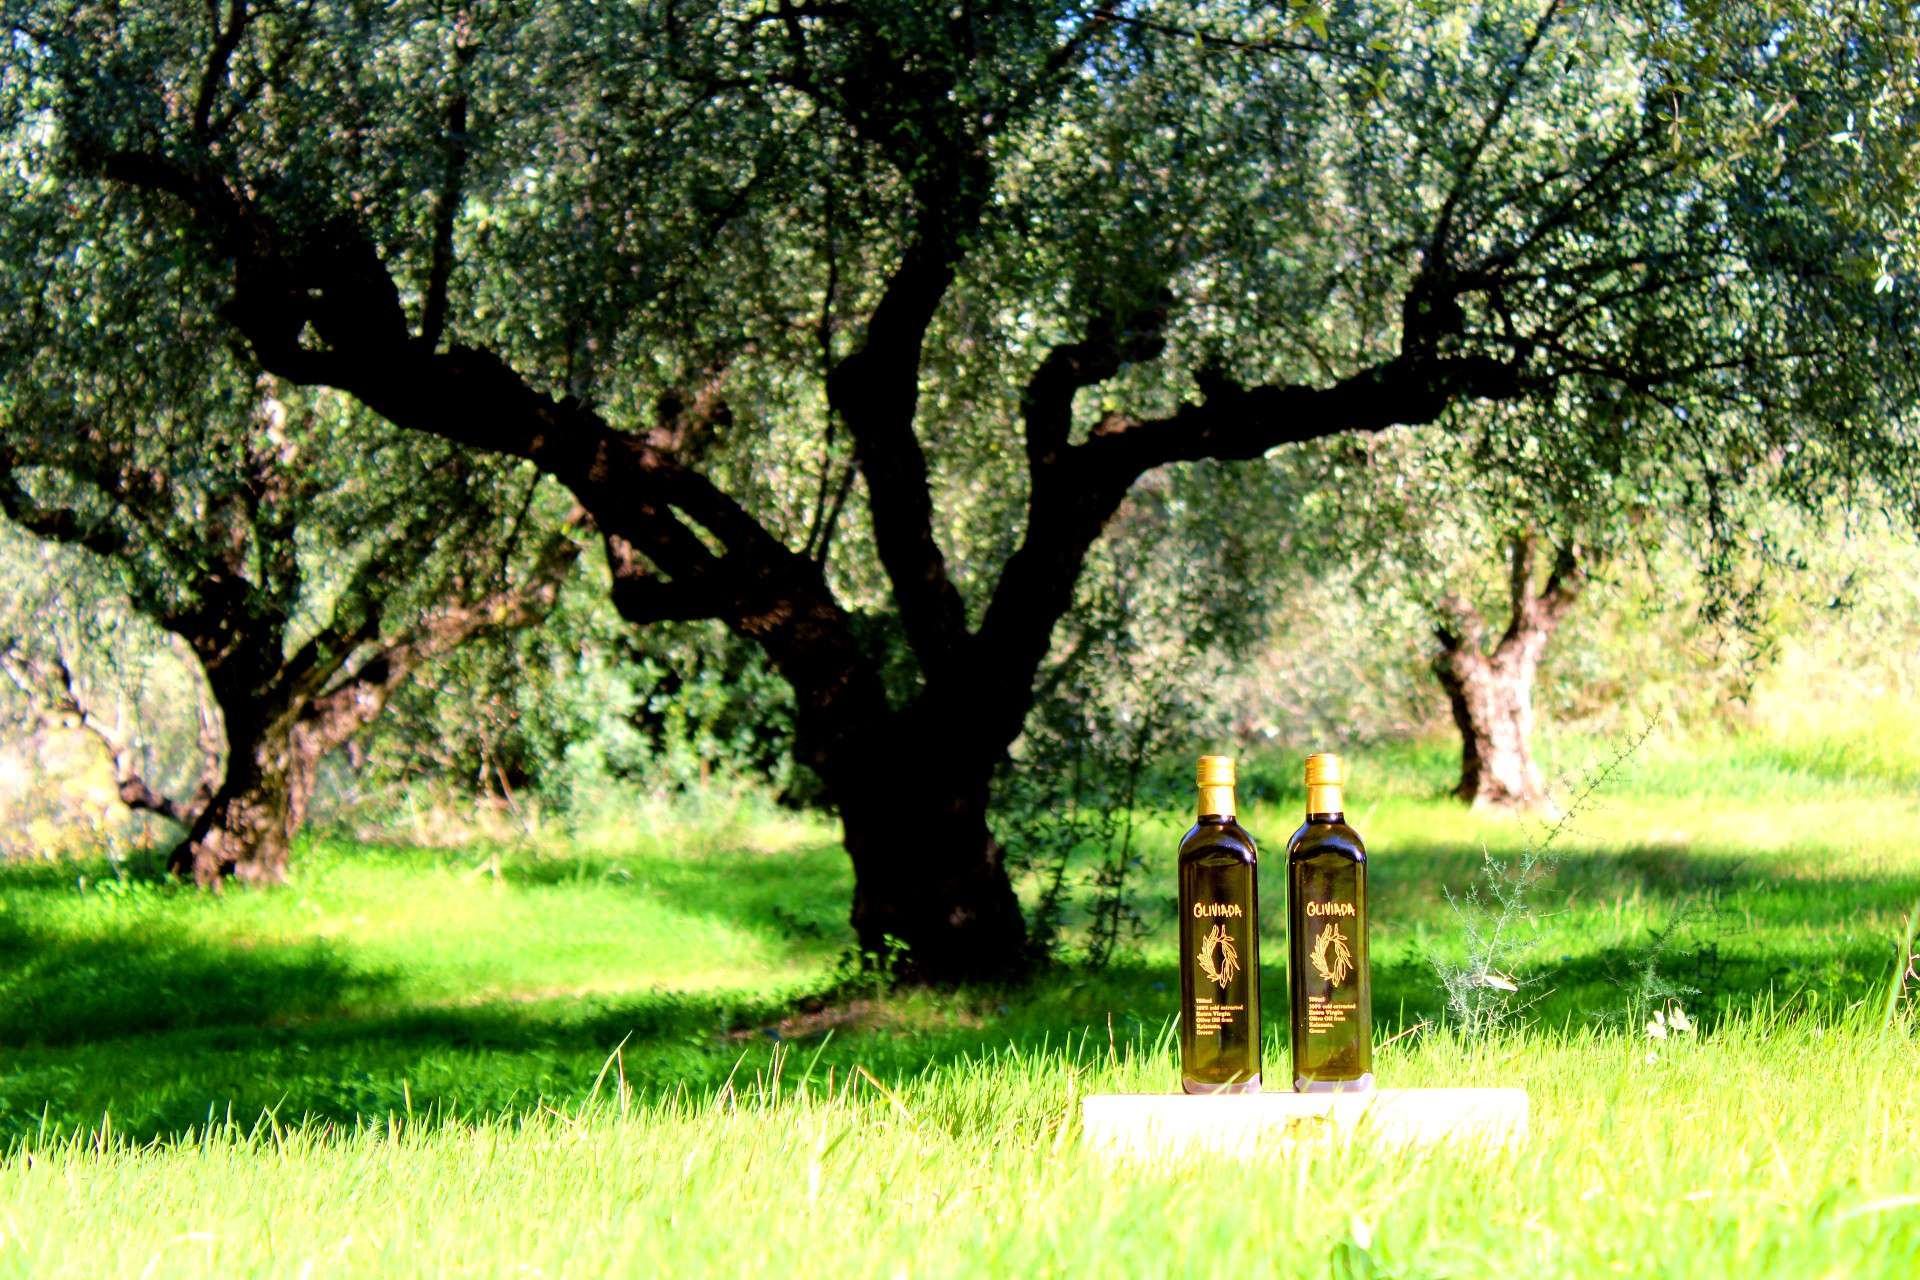 adopt an olive tree in greece